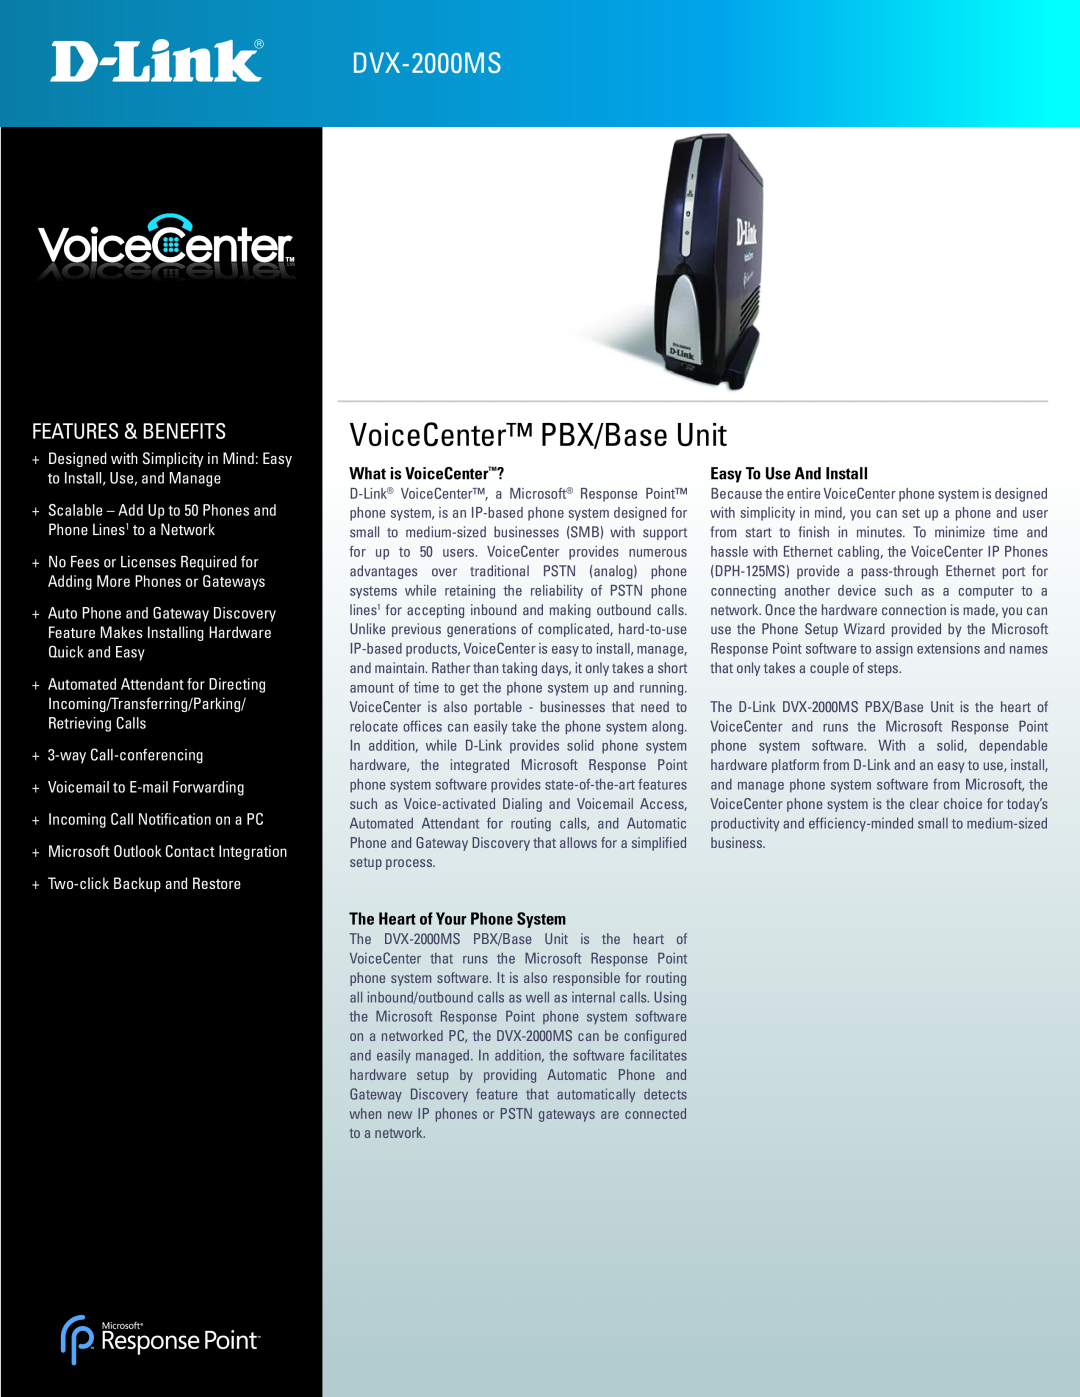 D-Link DVX-2000MS manual VoiceCenter PBX/Base Unit, Features & Benefits, What is VoiceCenter?, Easy To Use And Install 